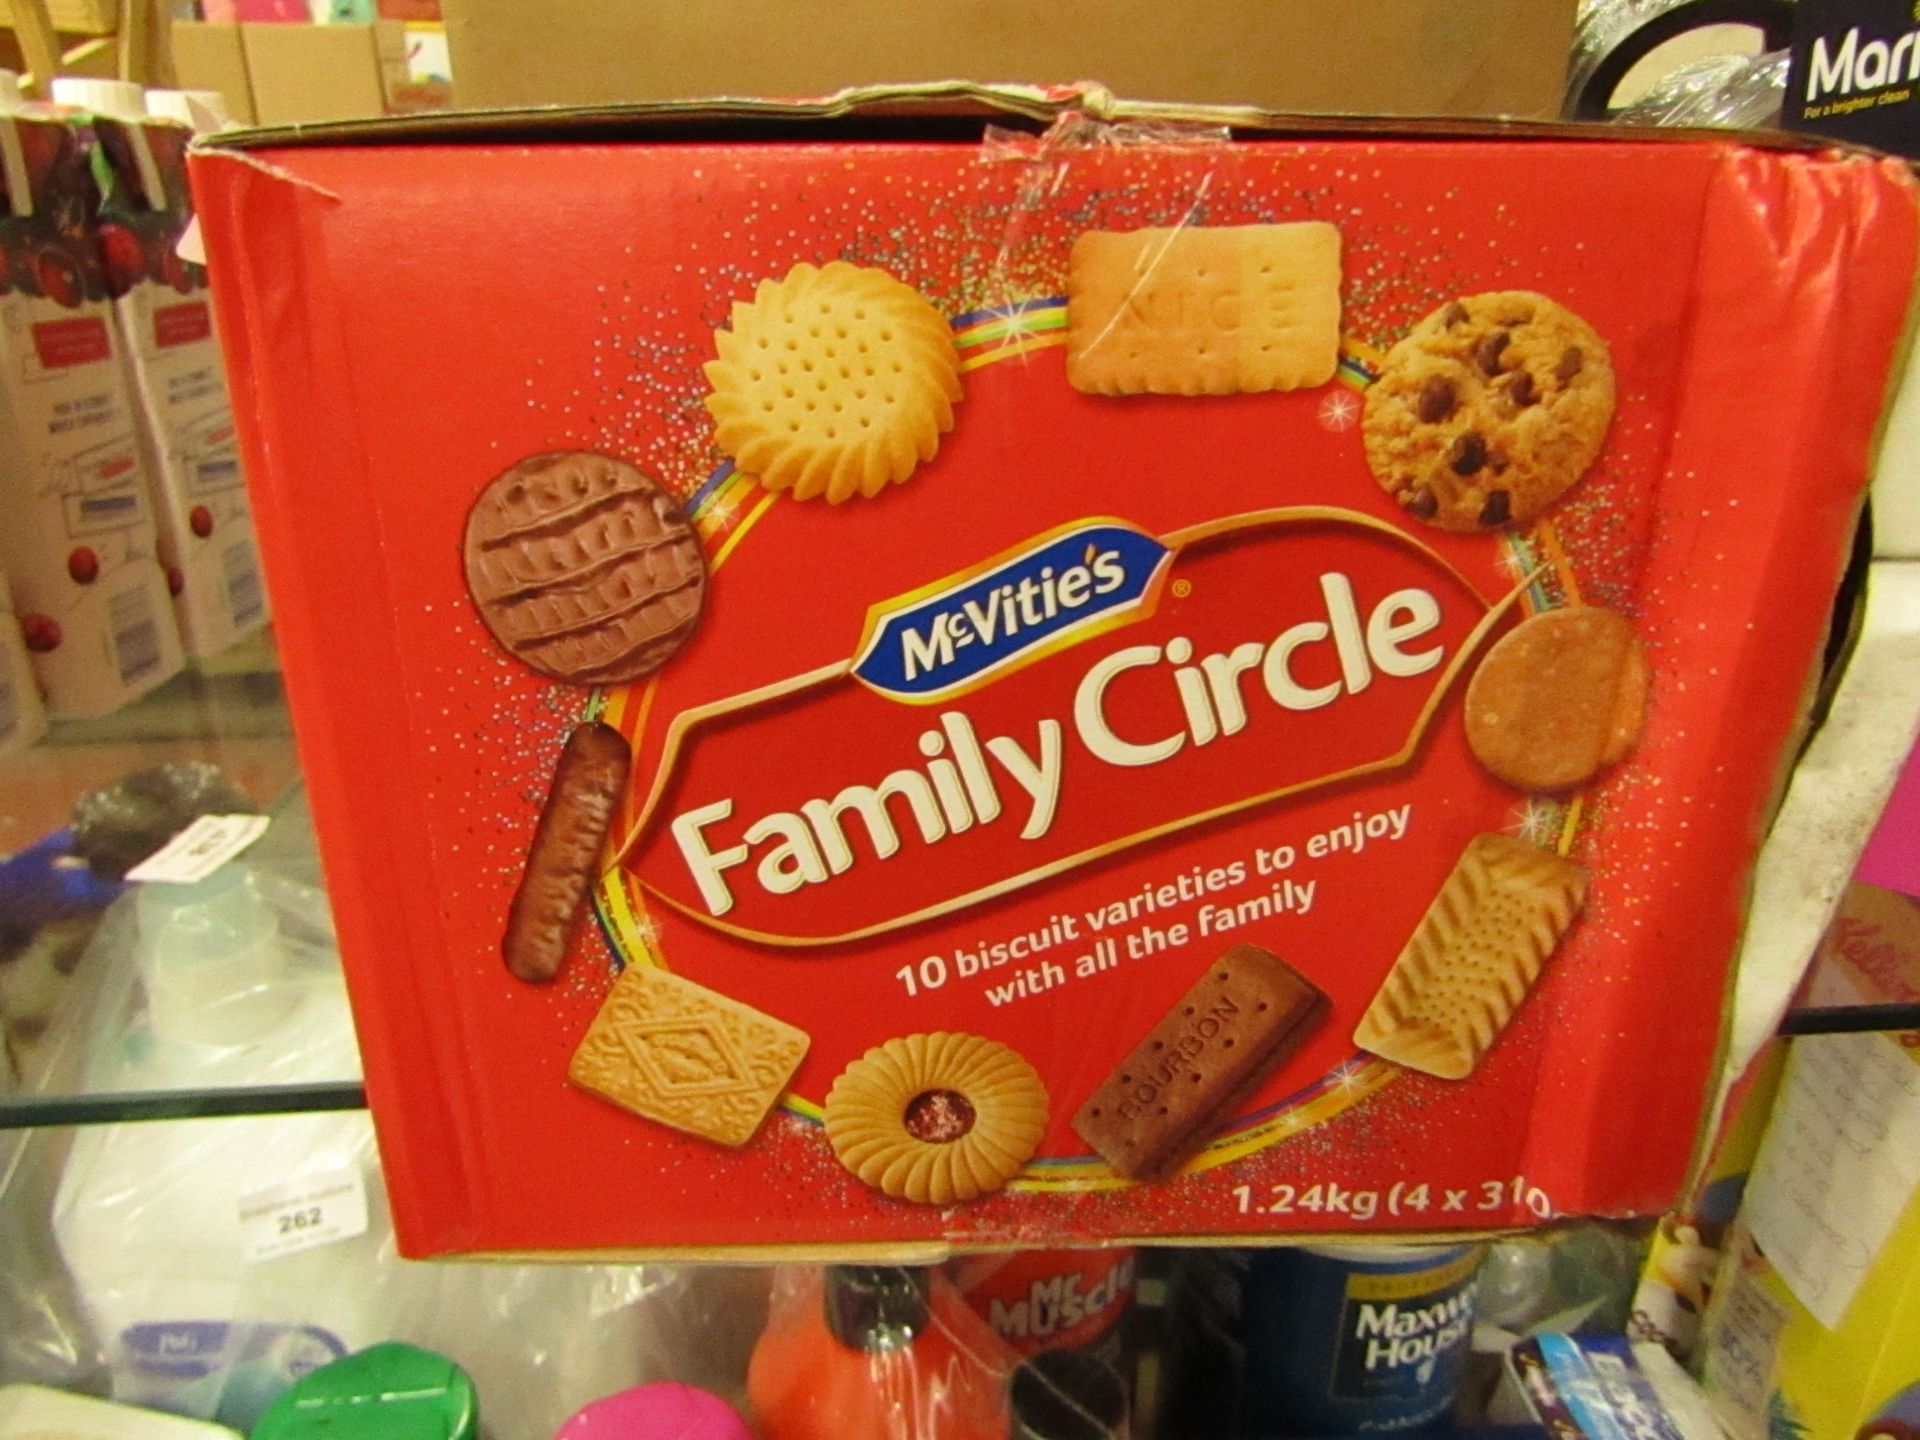 4 x 310g McVities Family Circle Buscuits. Box is slightly damaged but products are fine. BB 13/2/22